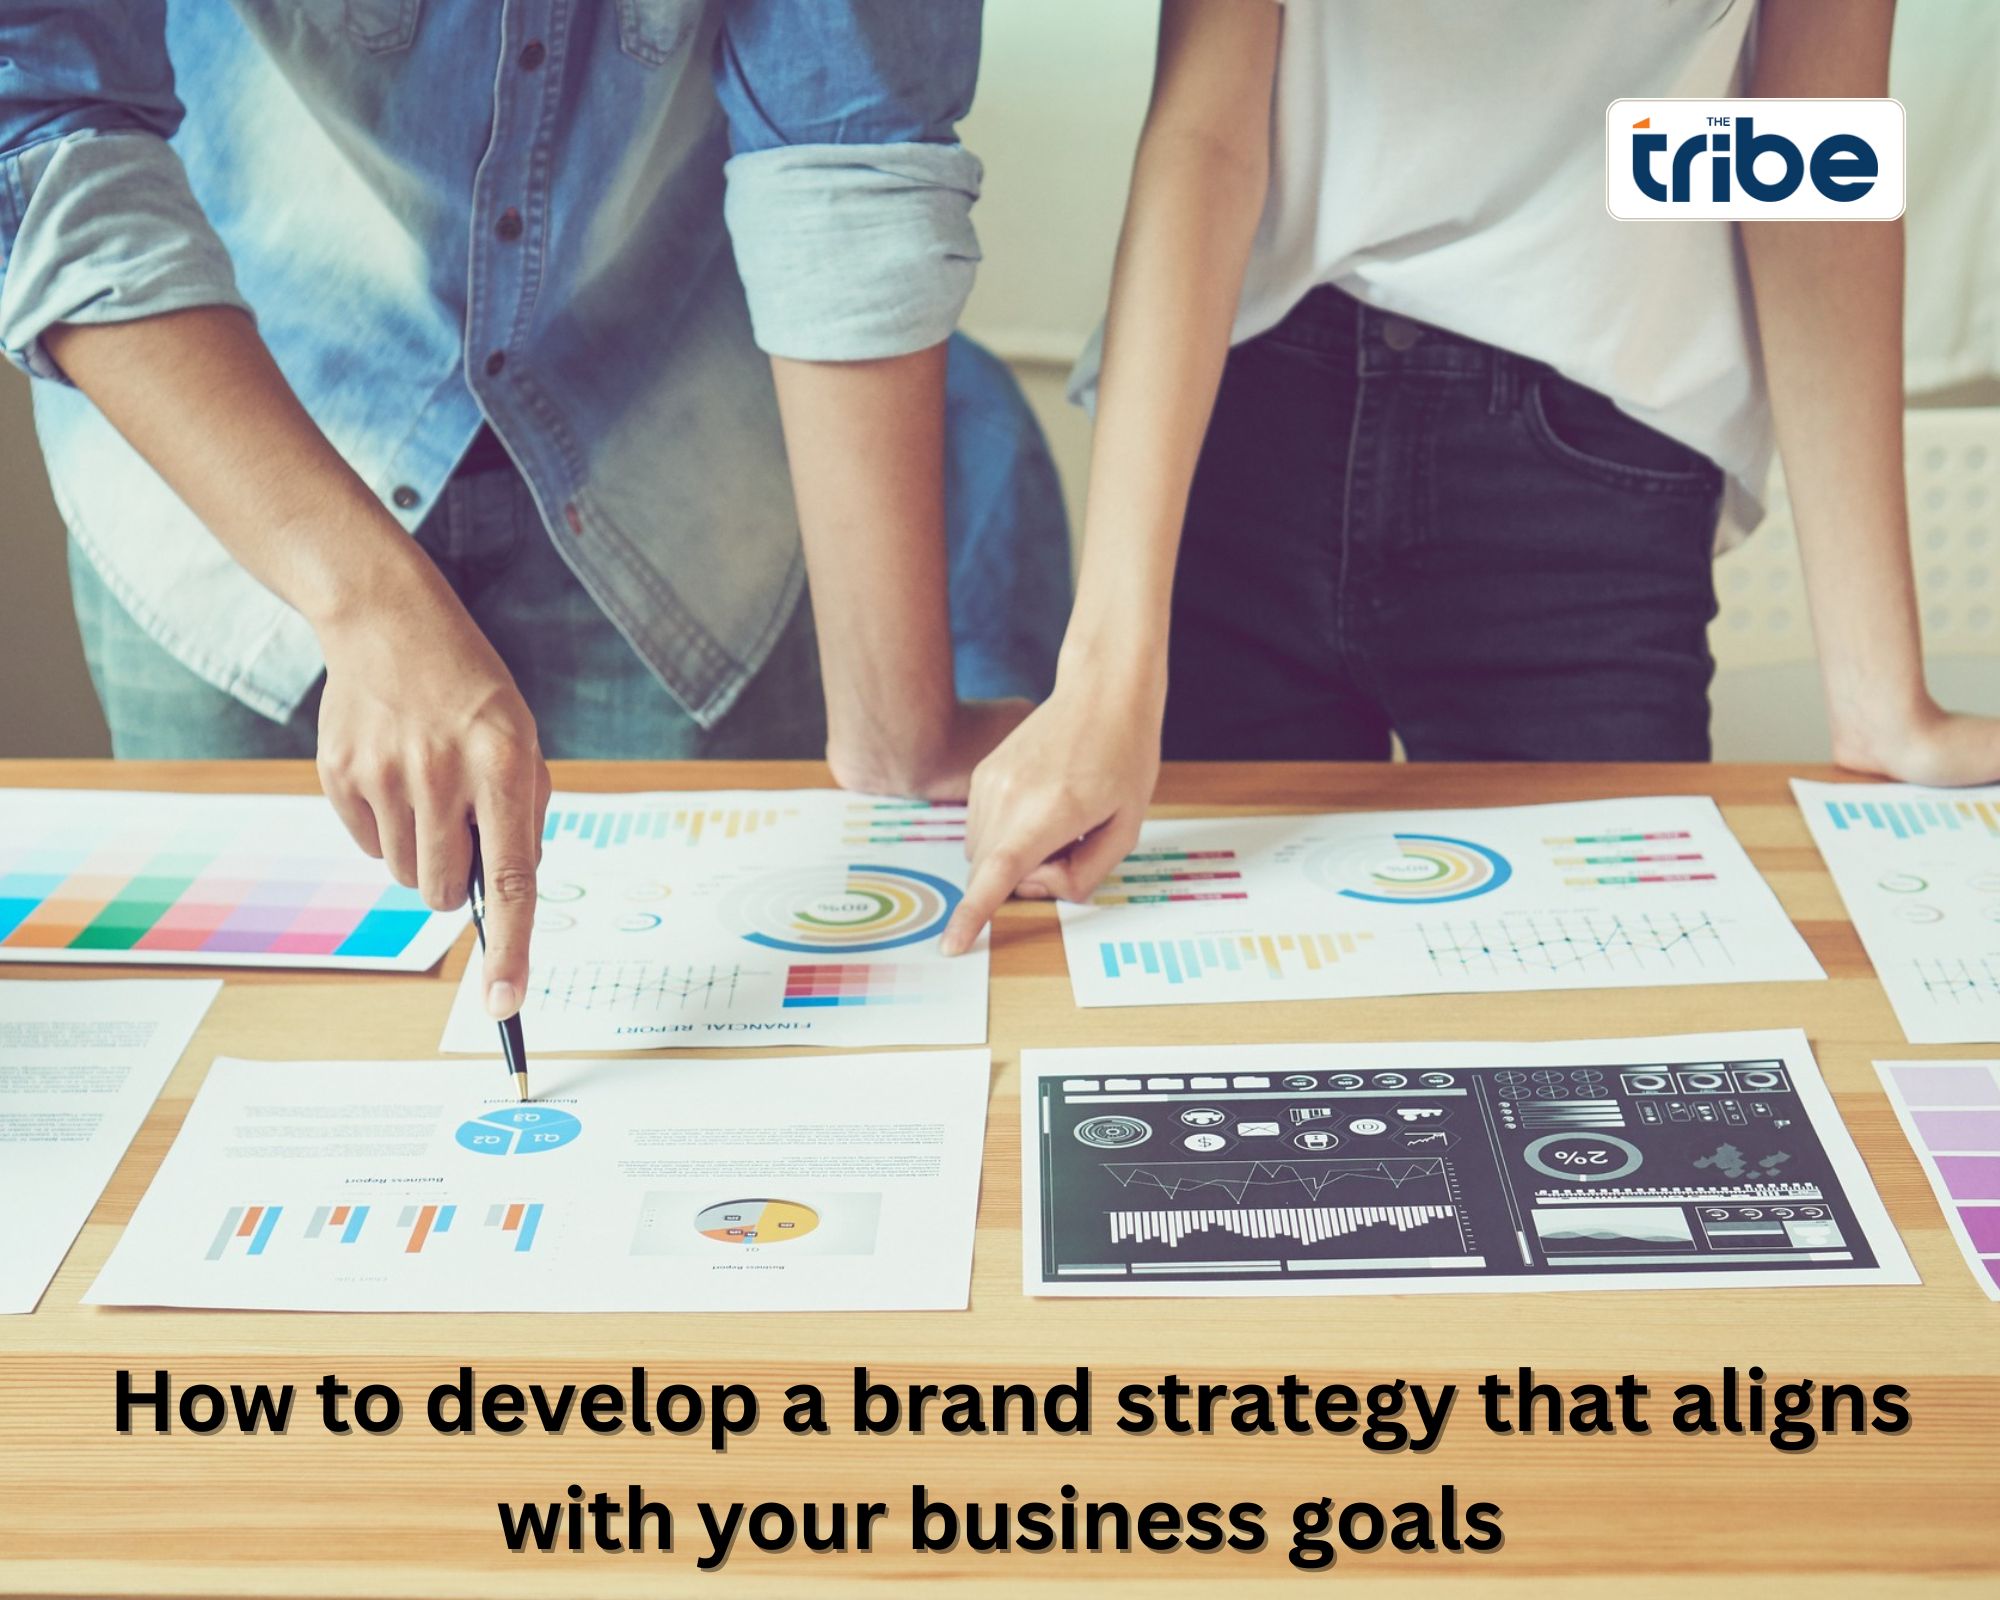 How to develop a brand strategy that aligns with your business goals